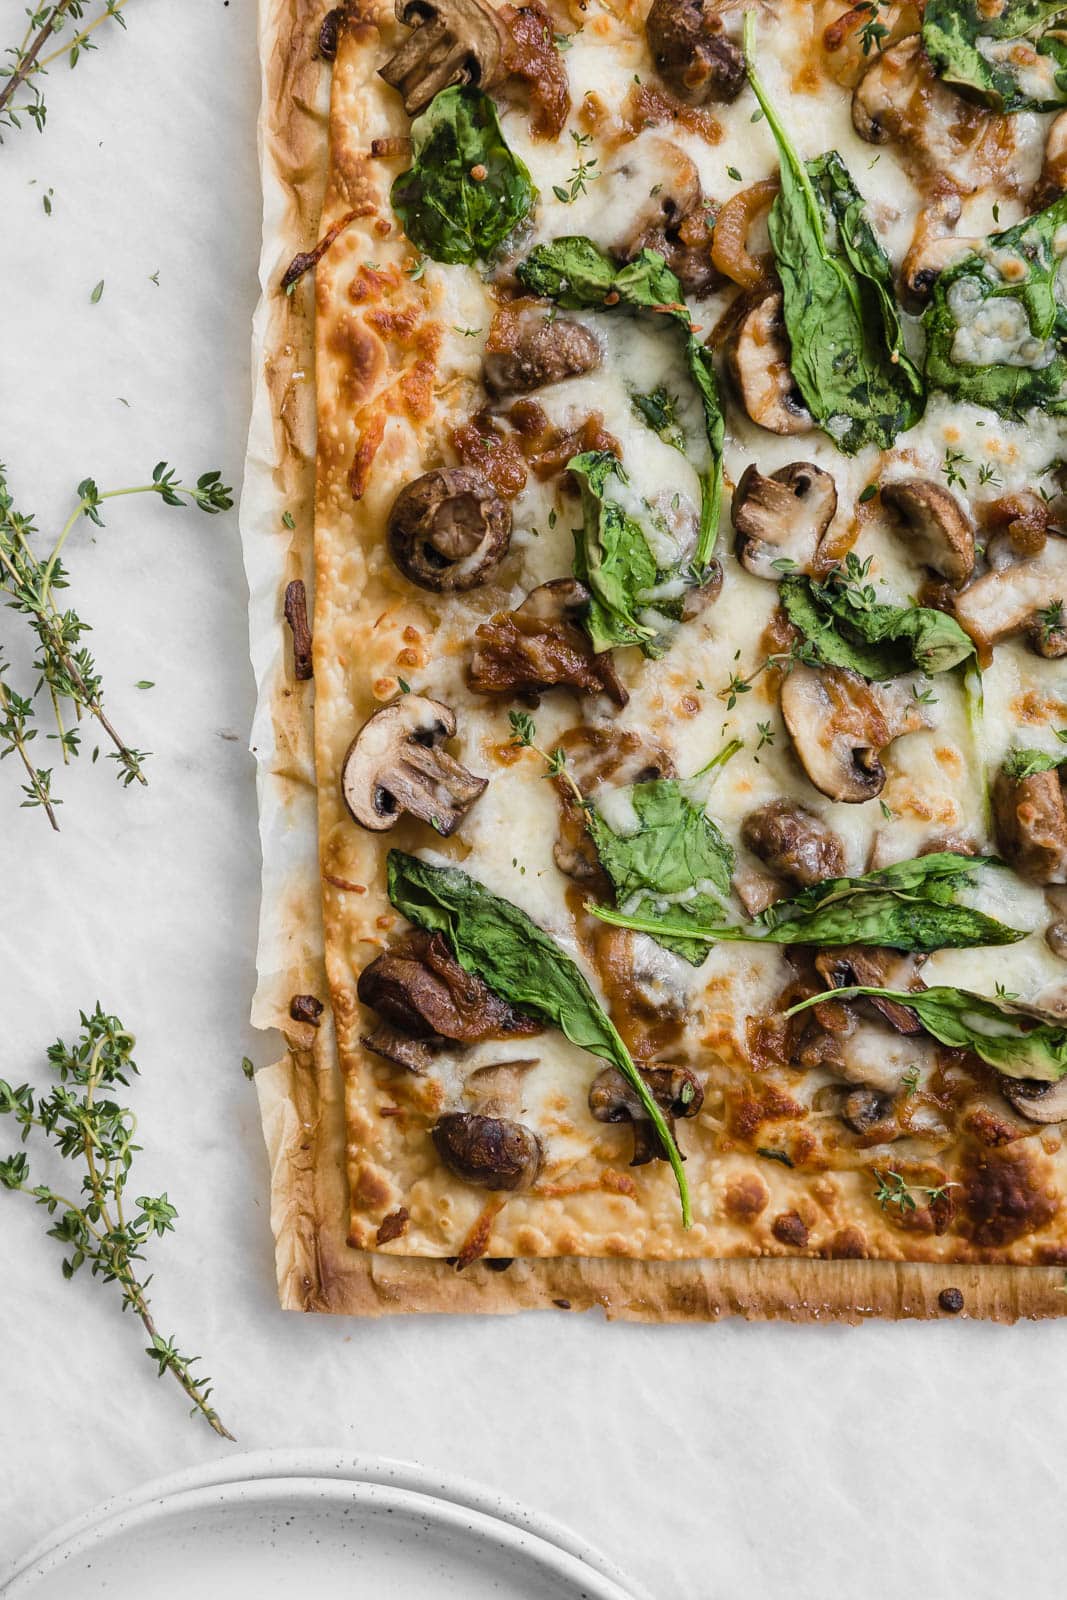 A thin crust Caramelized Onion Mushroom and Spinach Pizza perfect for those weeknights when you want a quick fix dinner!